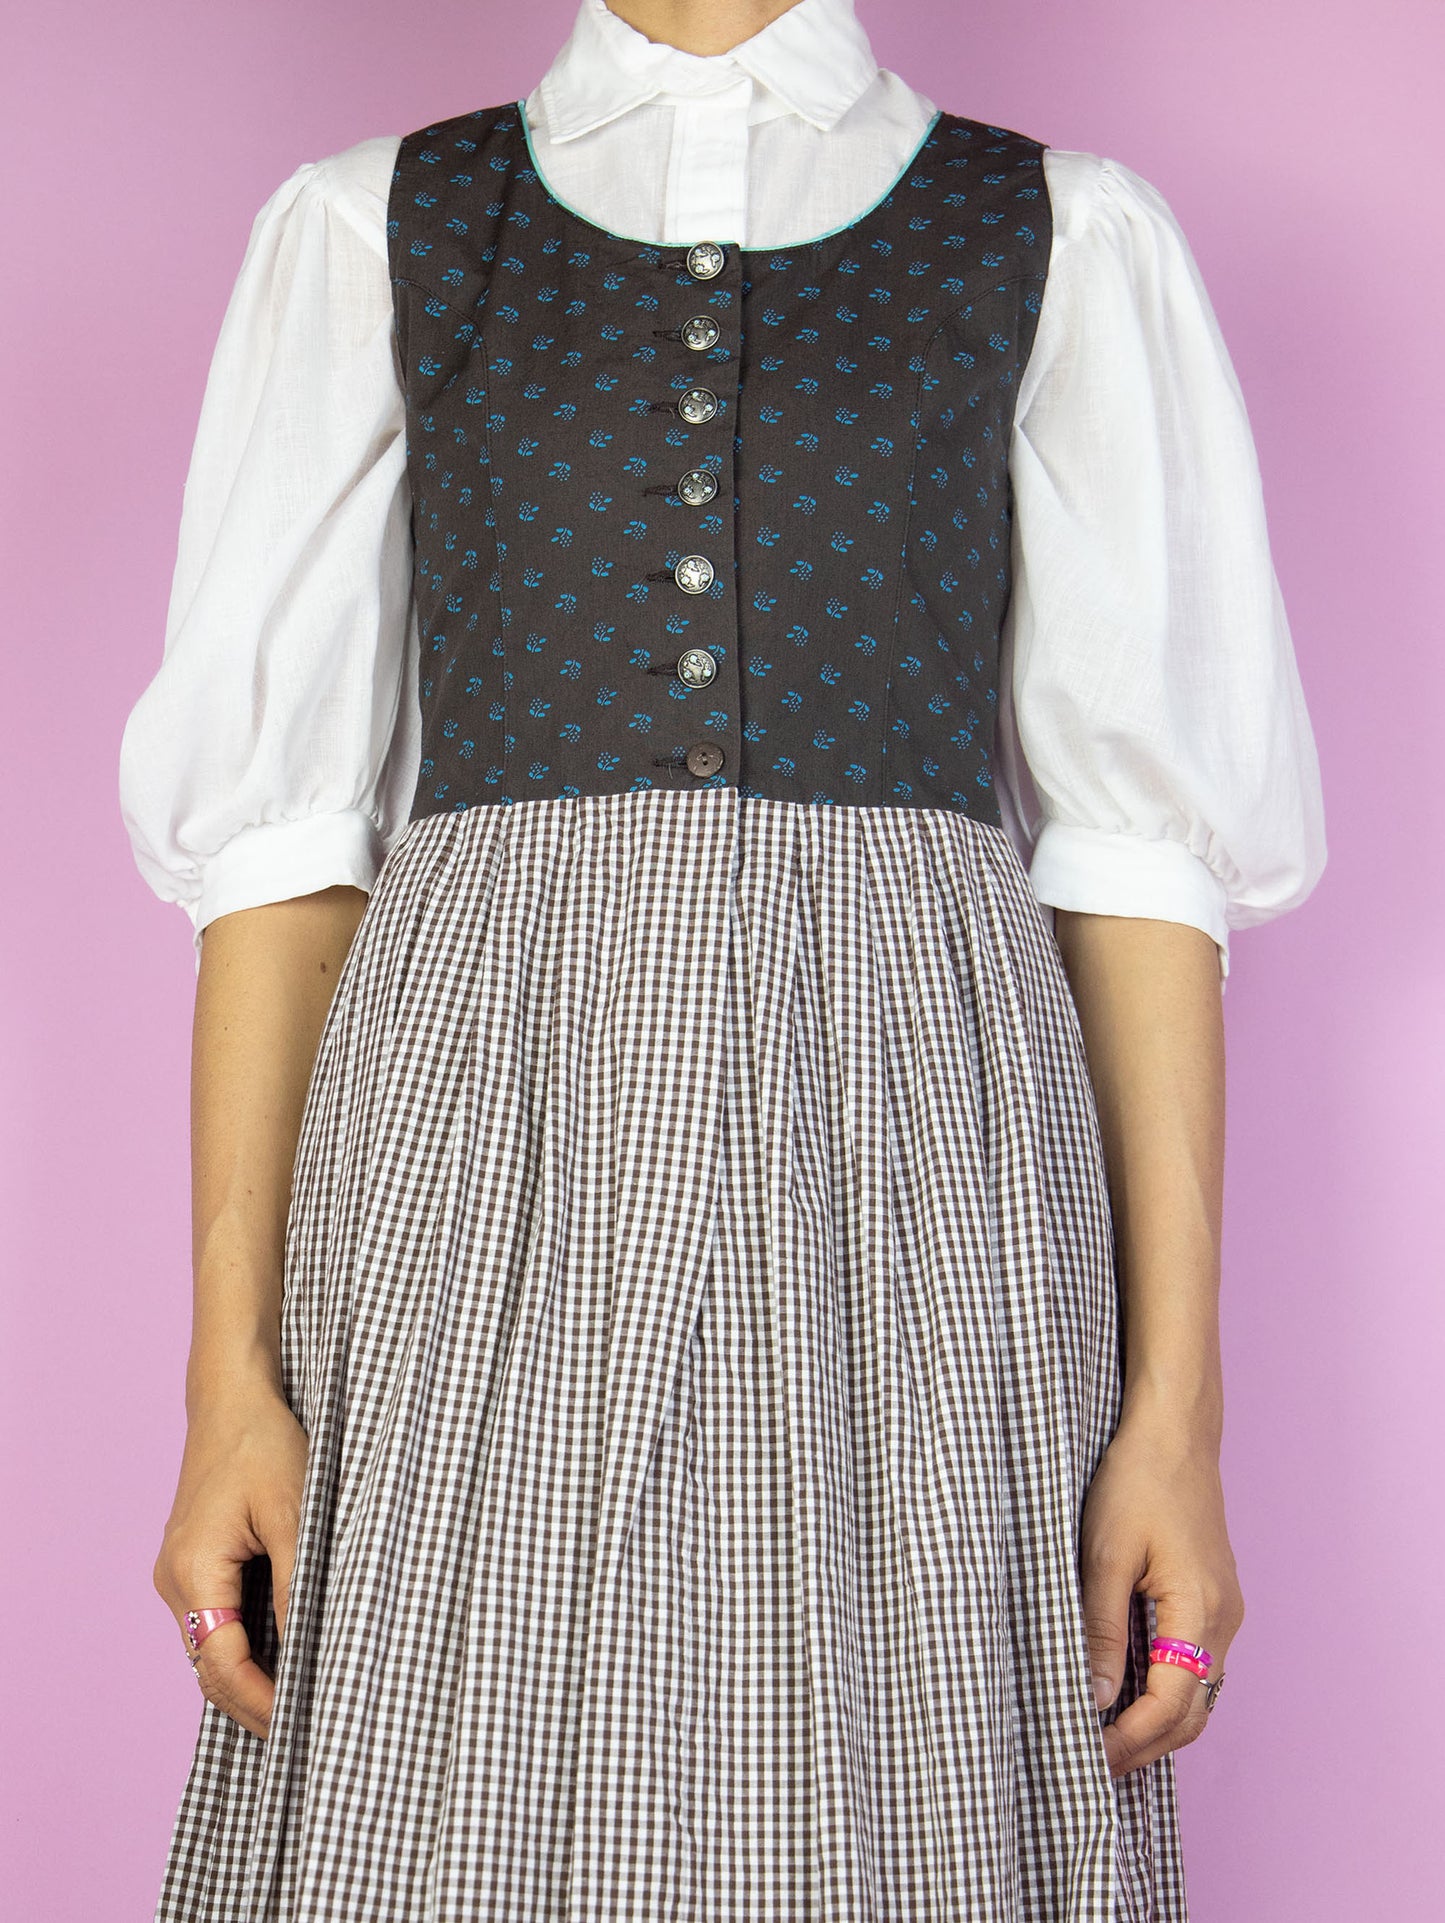 The Vintage 90s Brown Plaid Midi Dress is a sleeveless floral check dress with buttons. Cottage prairie 1990s gingham dress. The white blouse shown underneath is not included.